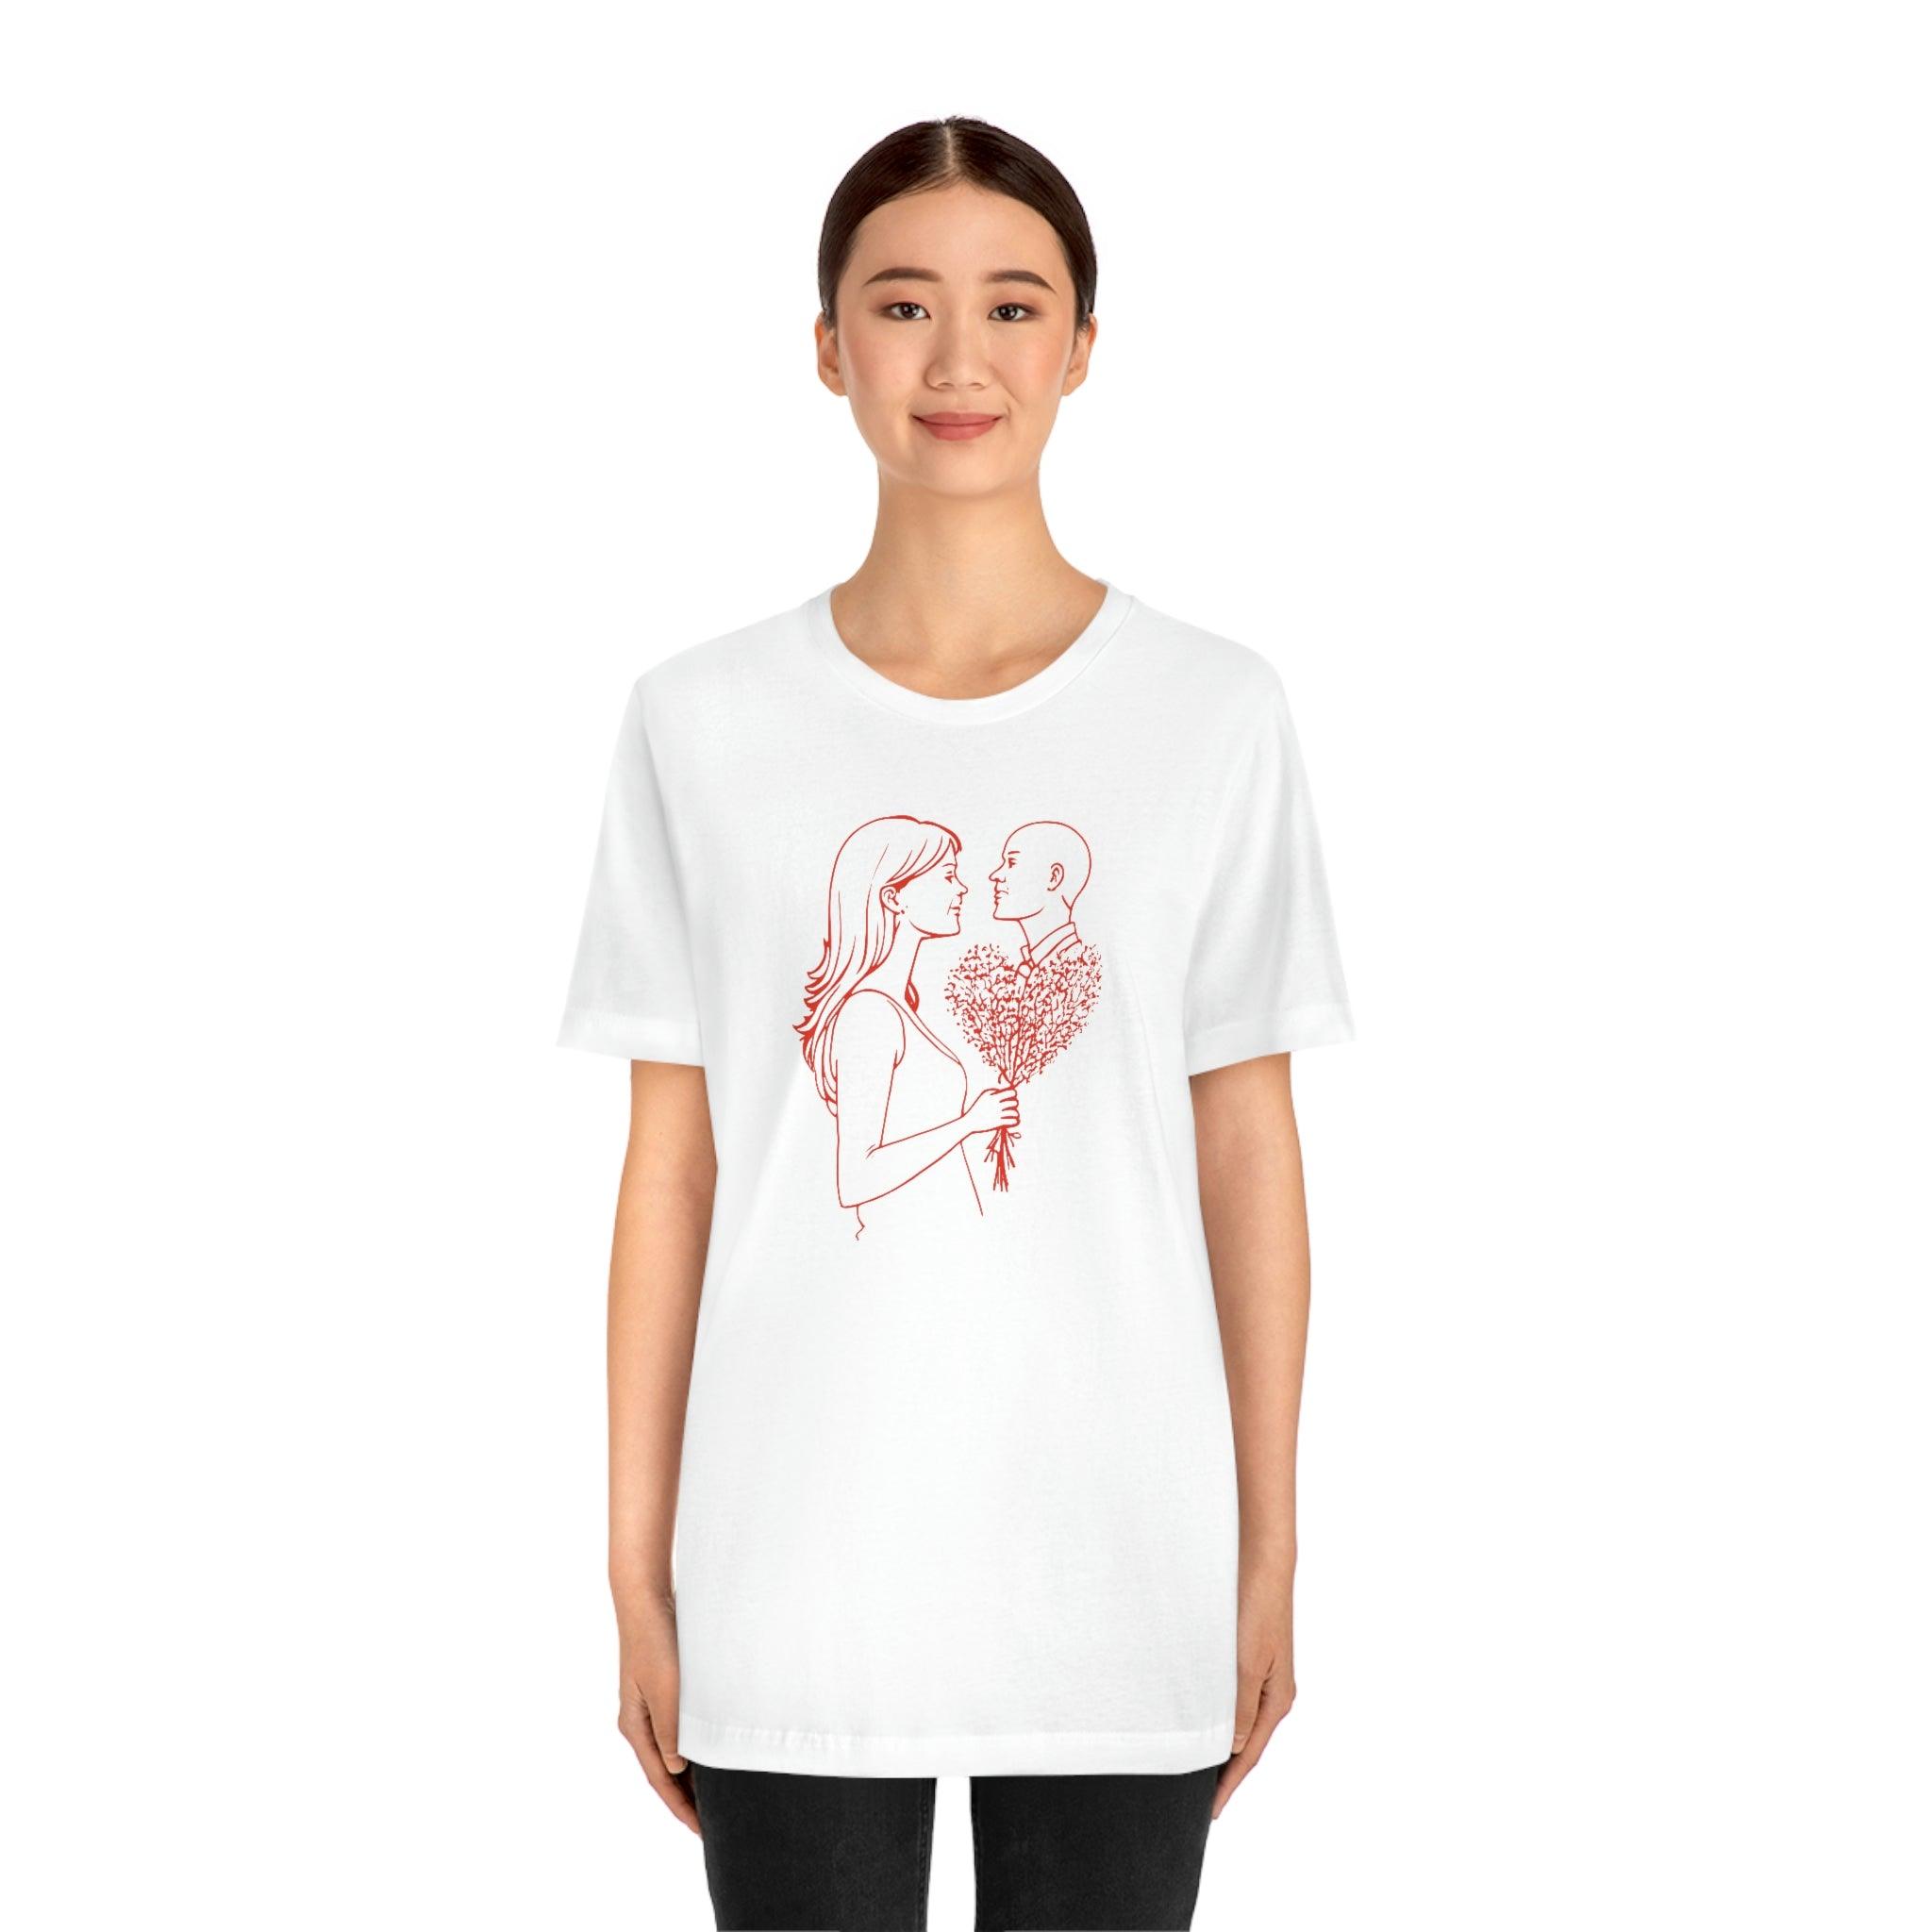 Love in Bloom: Valentine's Day Tee for Couples - Swag Nuggets